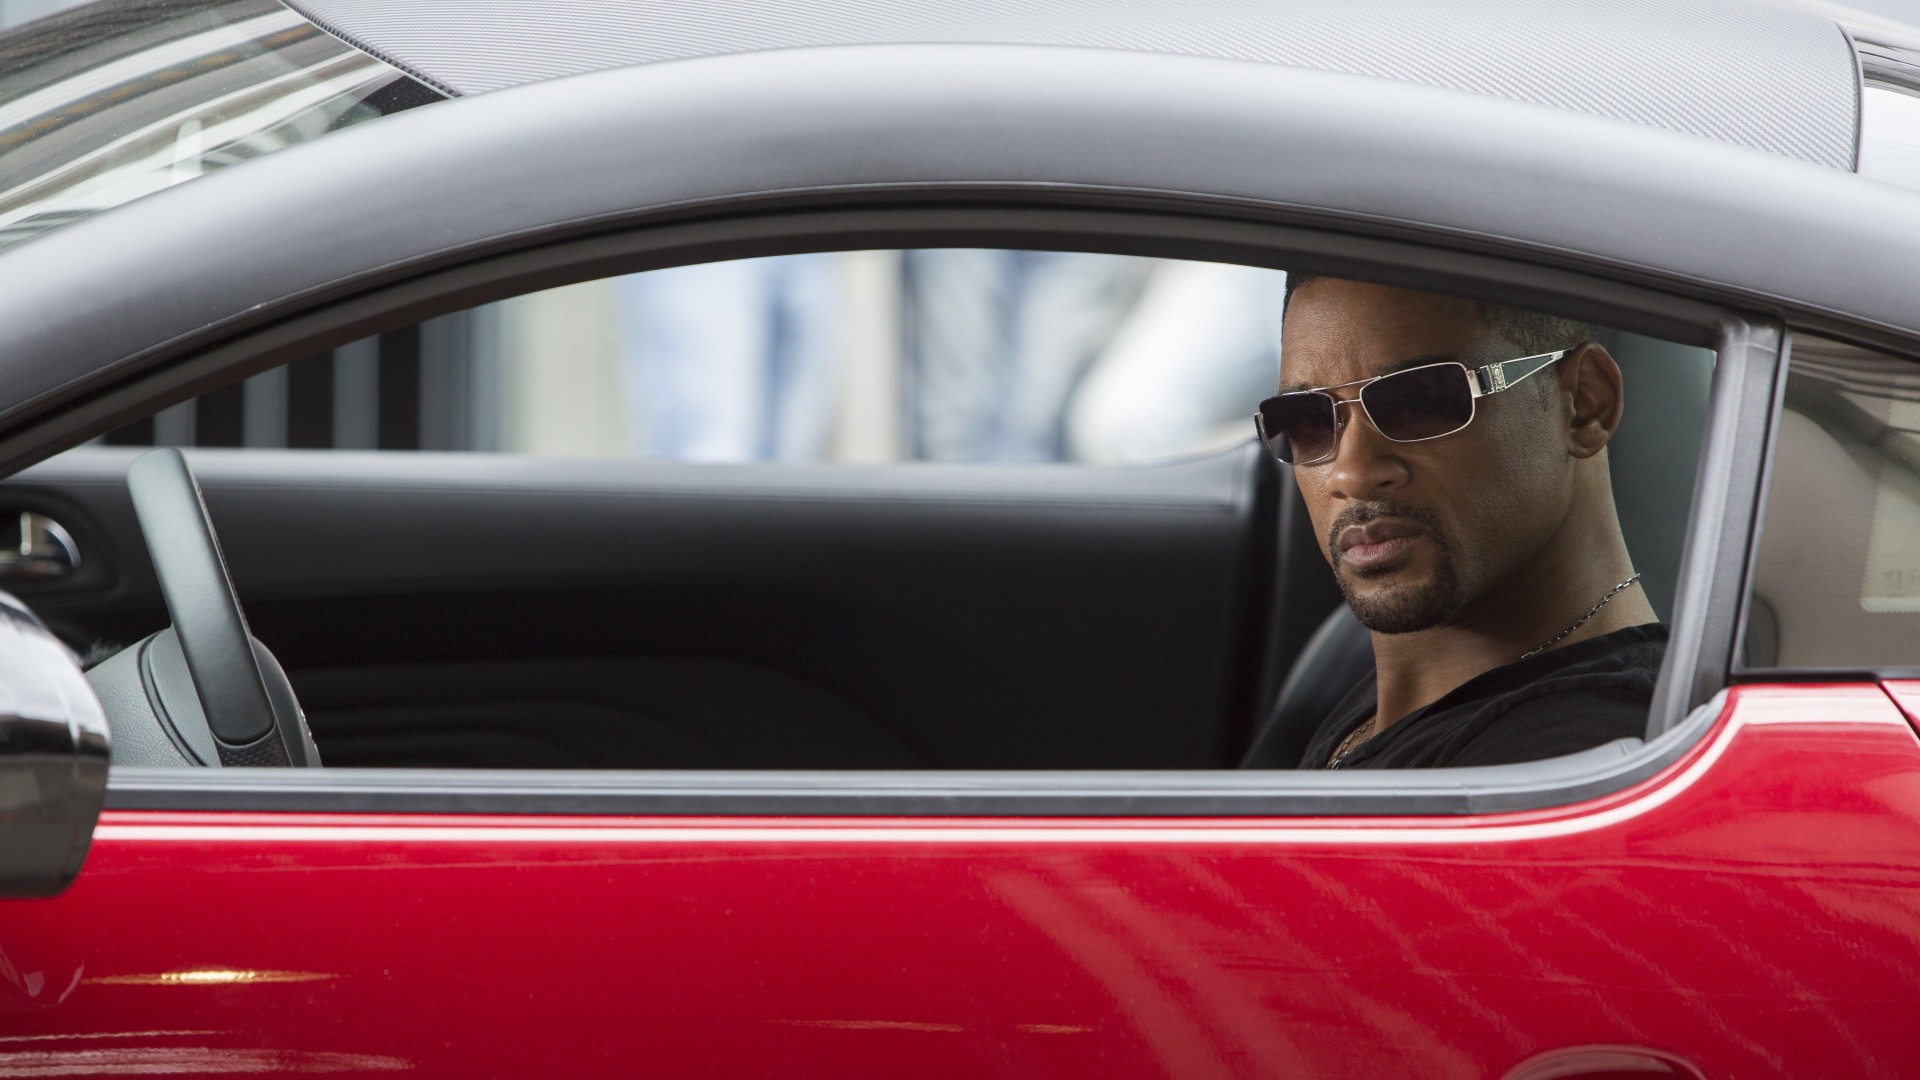 Will Smith at the shooting of "Focus" Wallpaper for Desktop 1920x1080